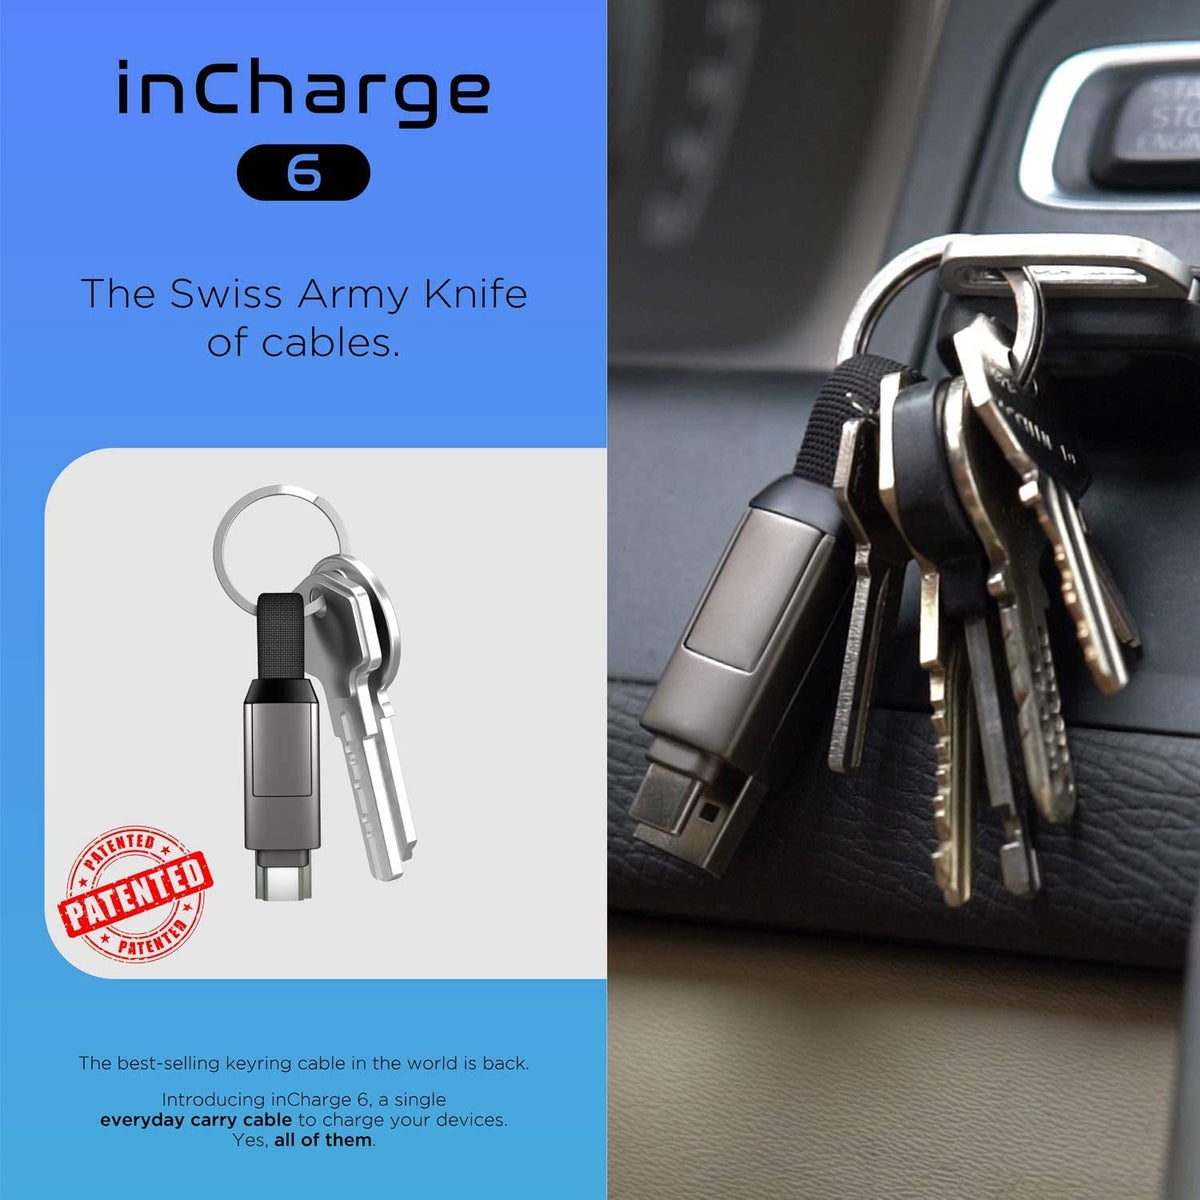 inCharge 6-in-1 Cables